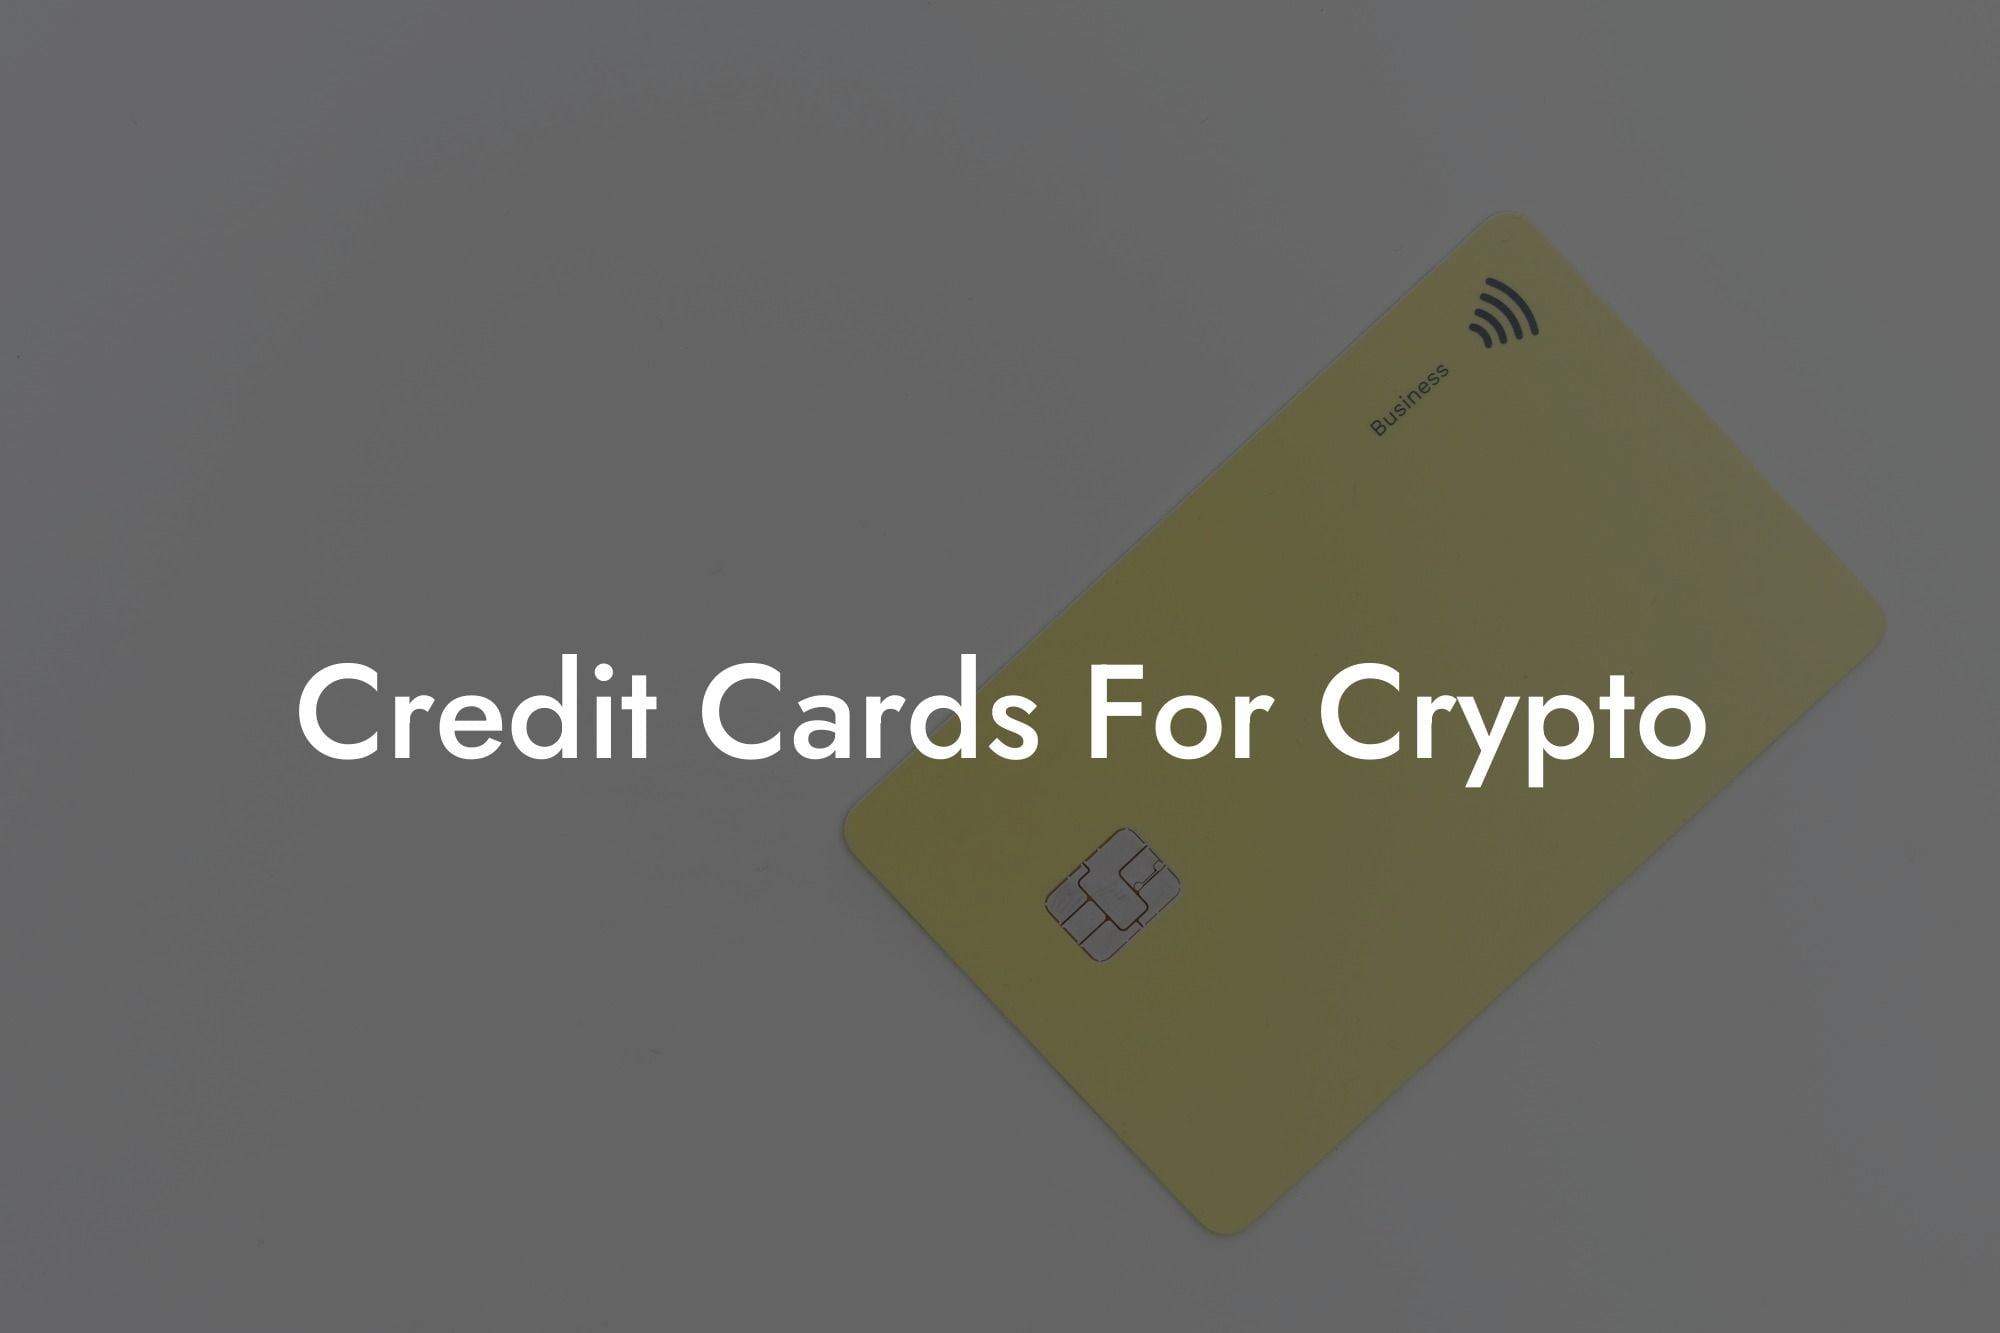 Credit Cards For Crypto